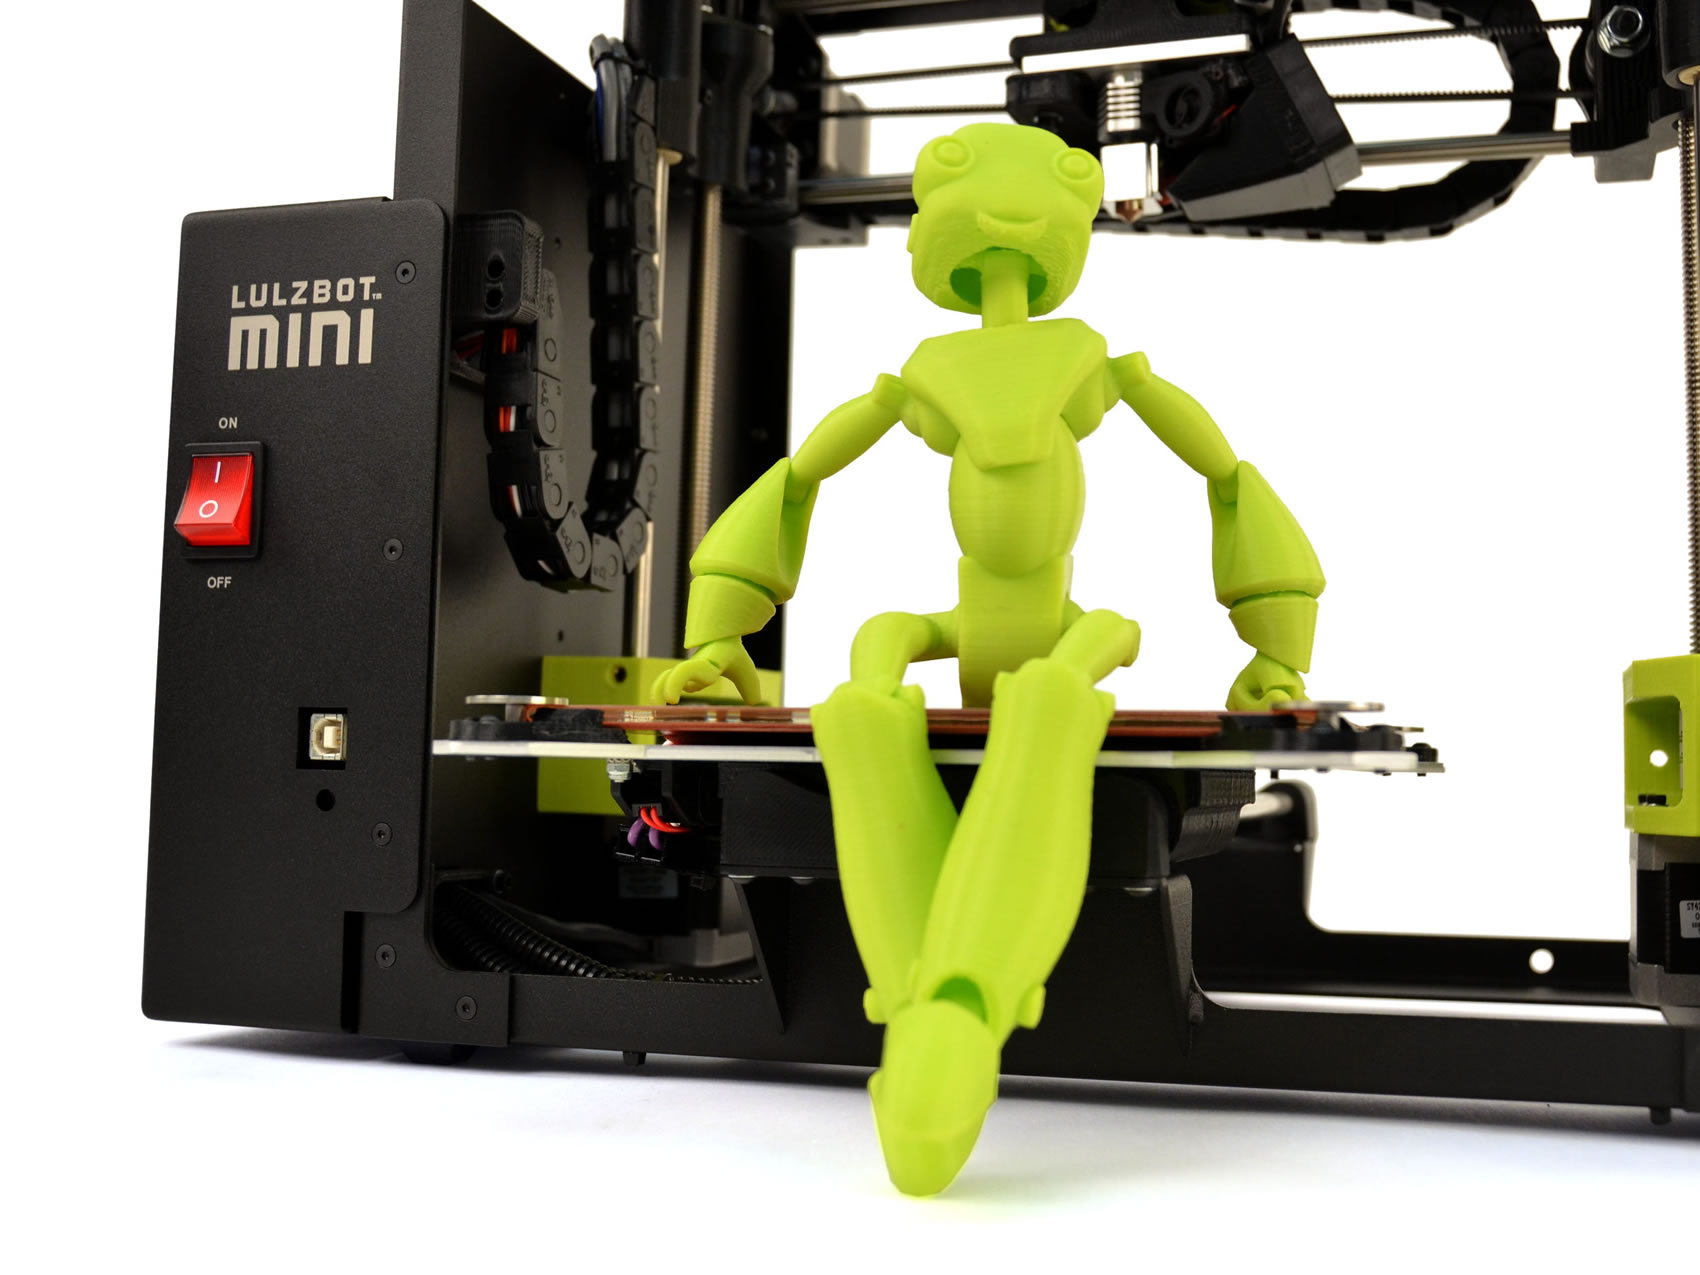 LulzBot and the creation of innovation image source - Aleph Objects Inc.